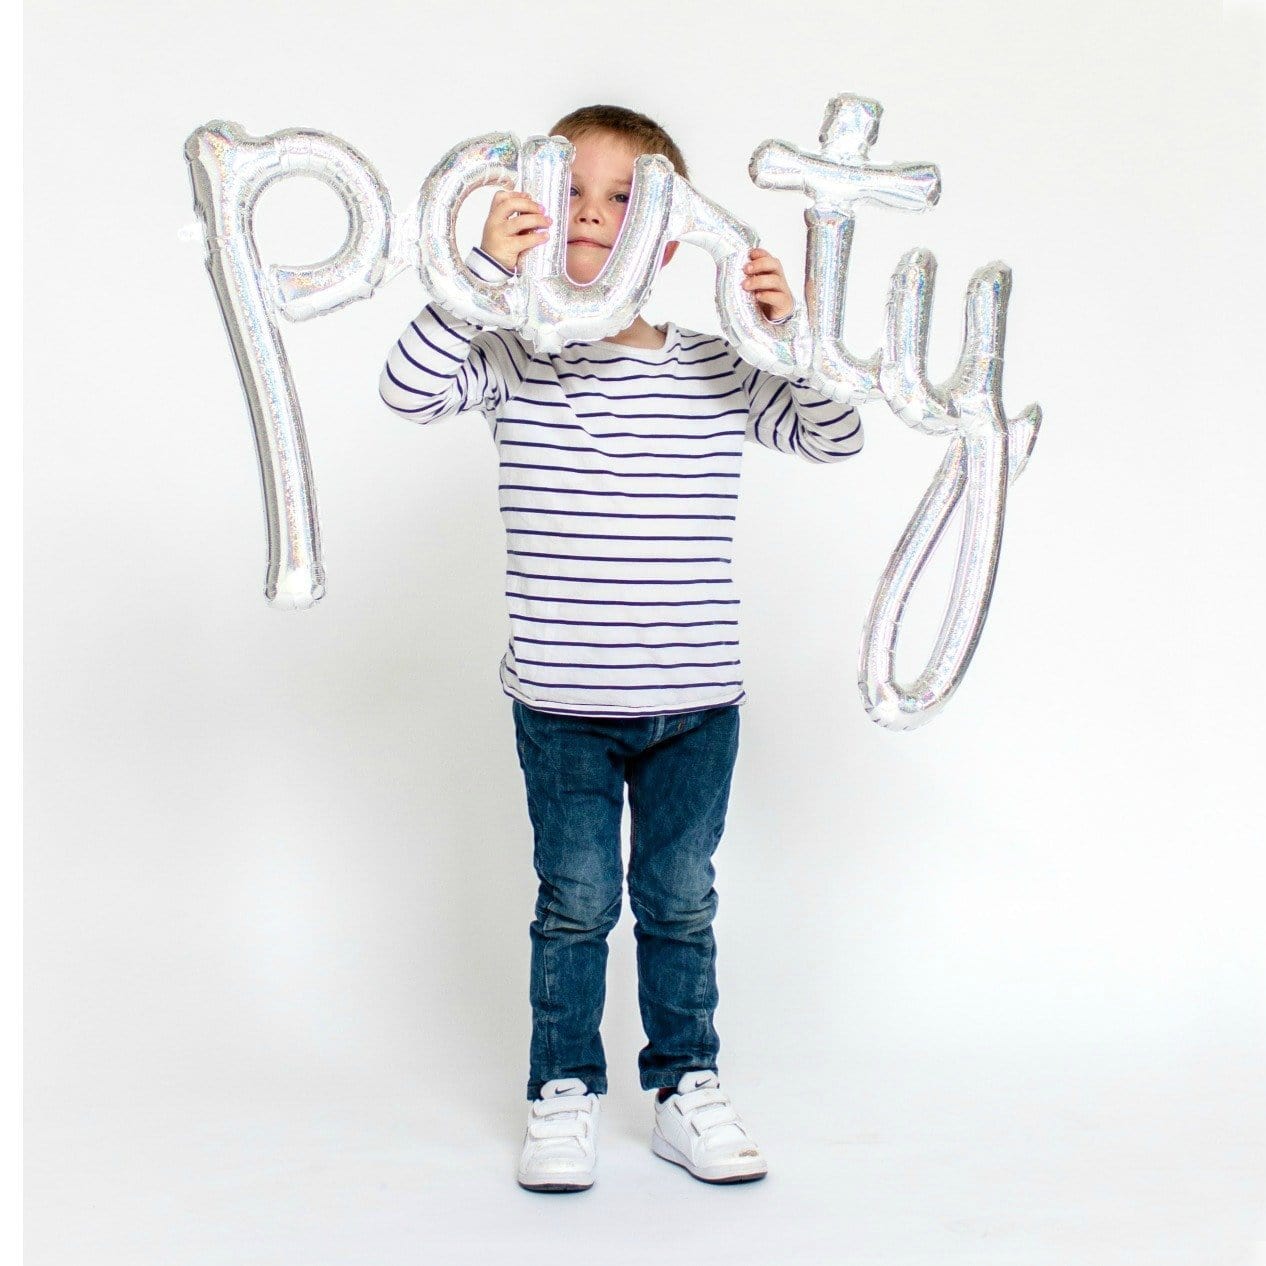 Party Word Balloon | Big Party Balloon Banner | Online Balloons UK Anagram